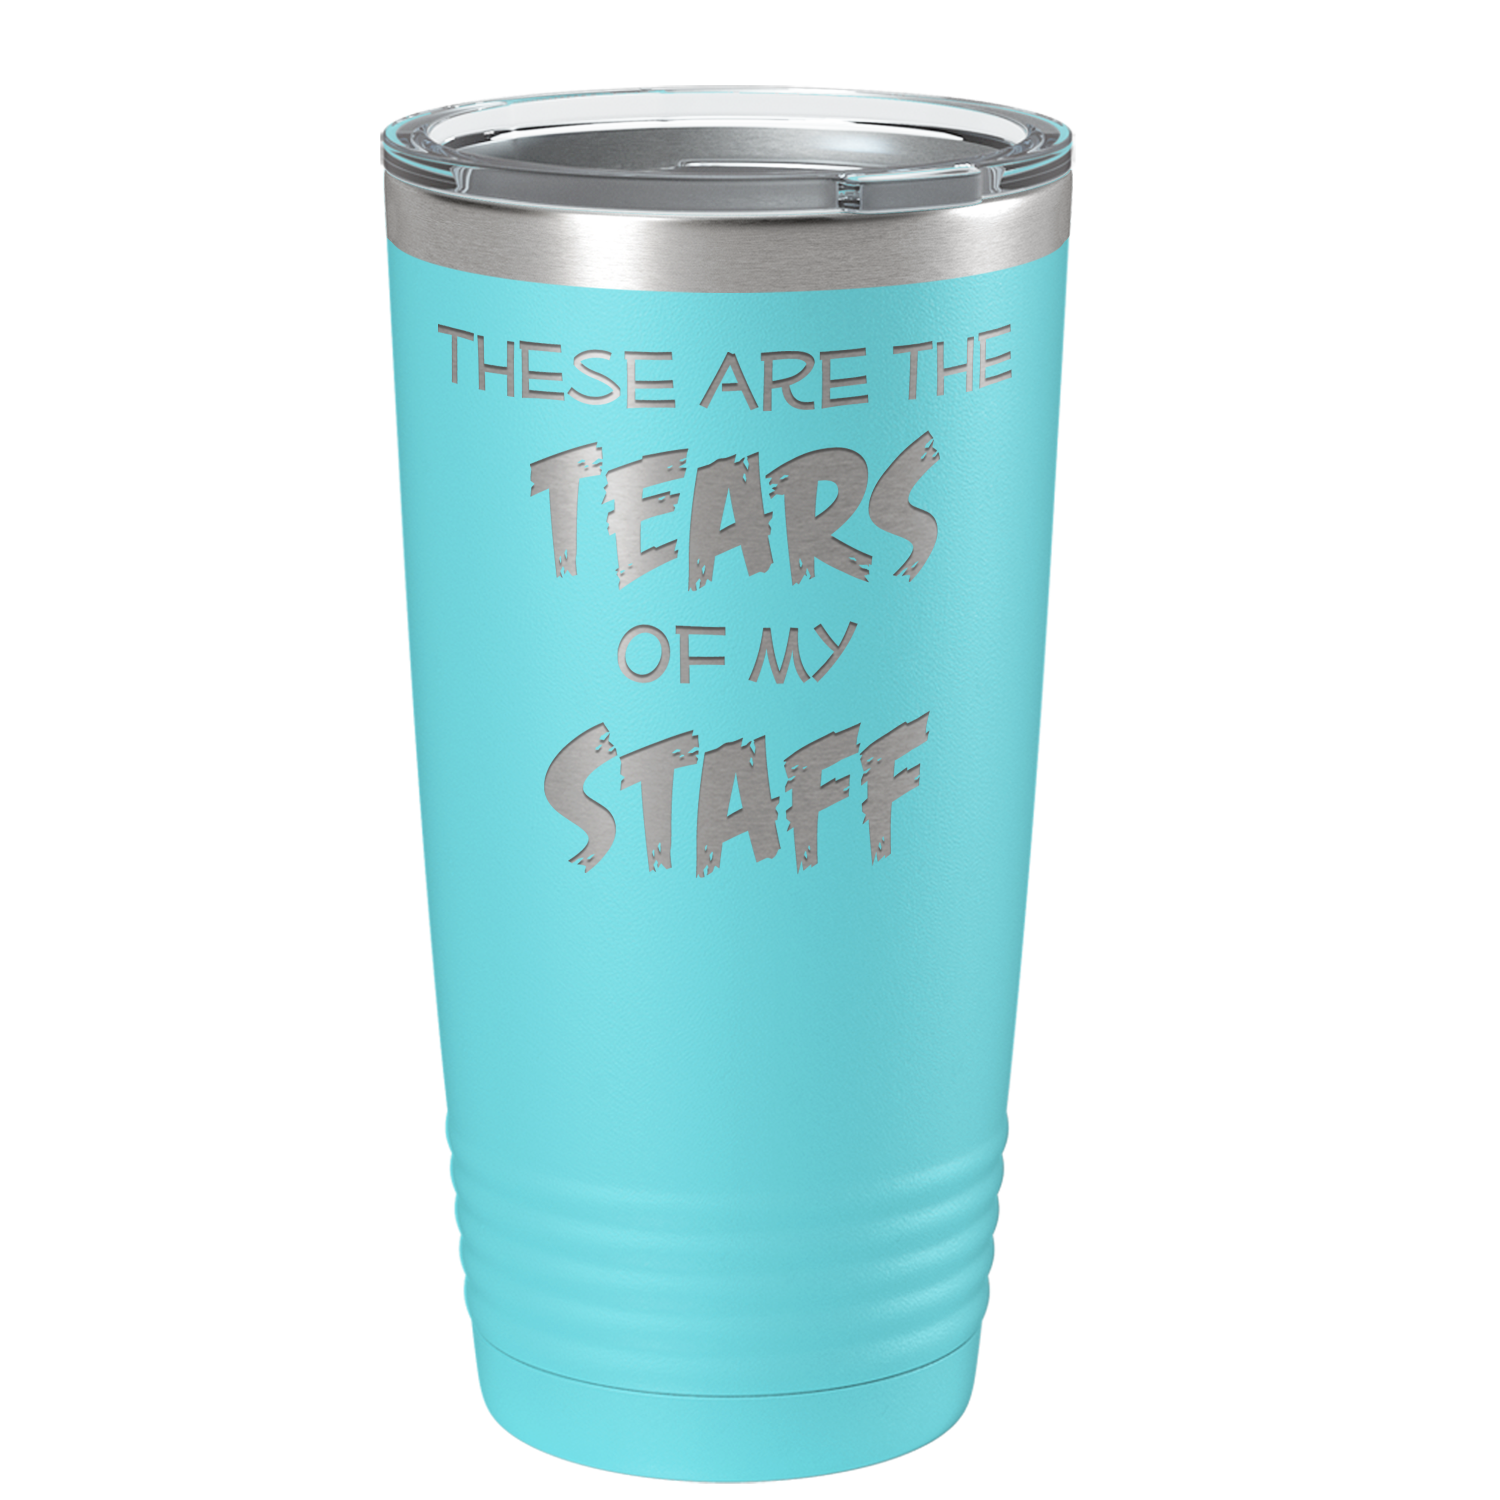 These are Tears of my Staff on Lite Blue 20 oz Stainless Steel Ringneck Tumbler